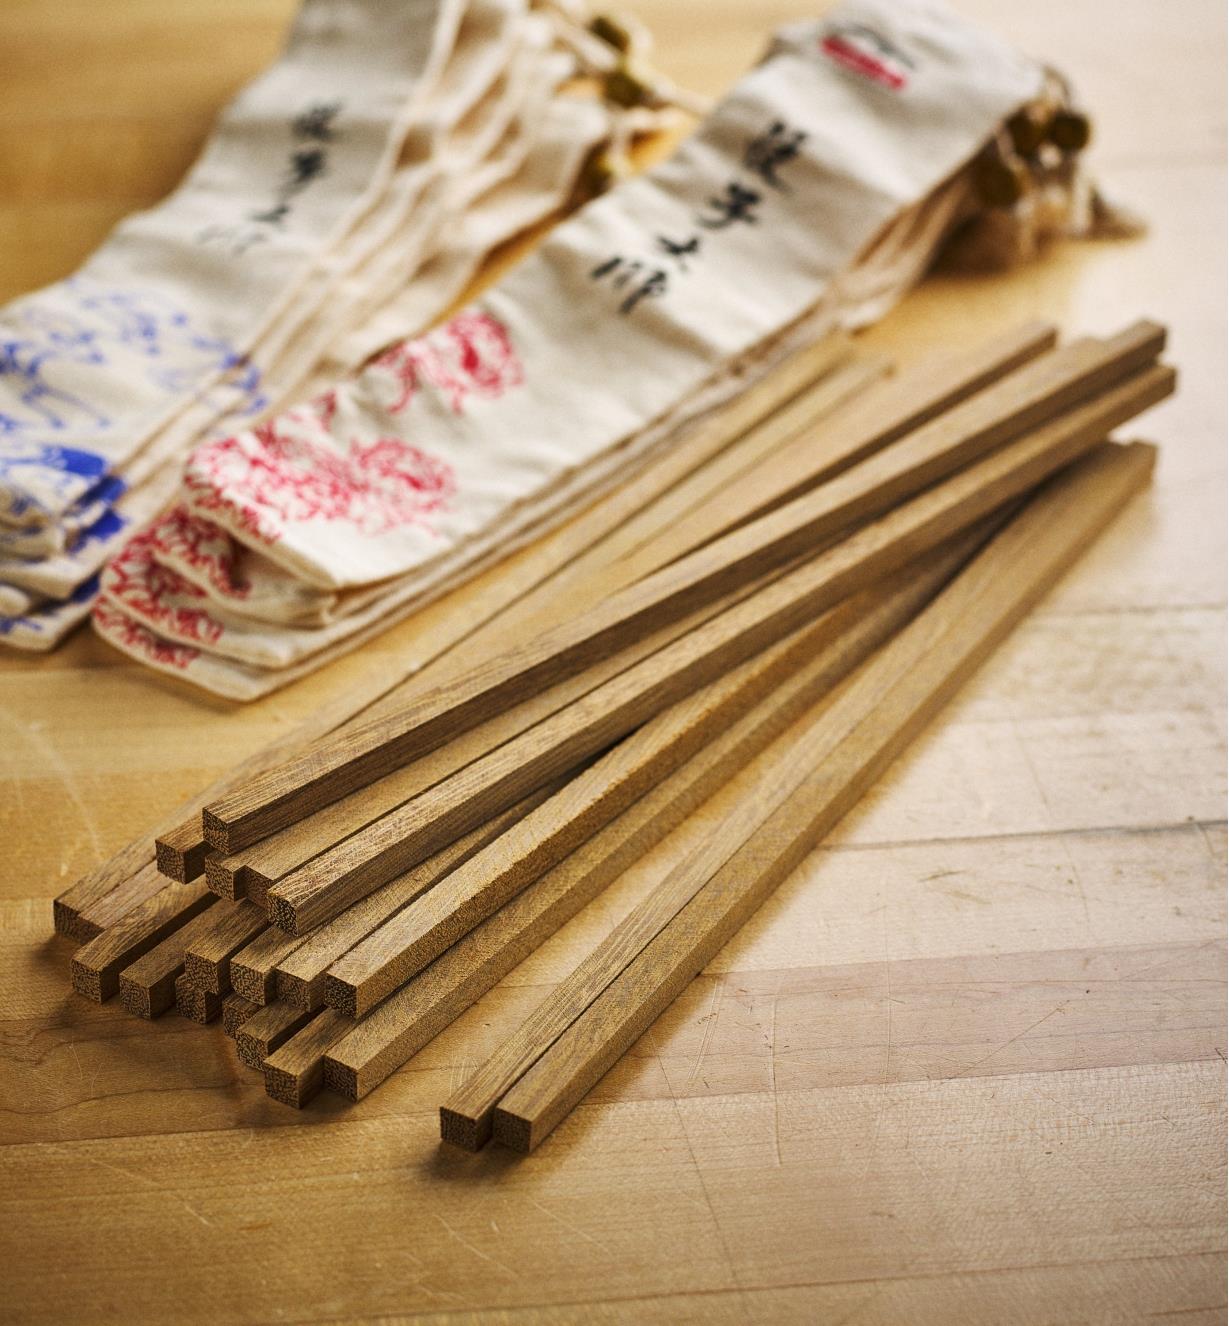 Pile of 10 wenge chopstick blanks with bags in the background